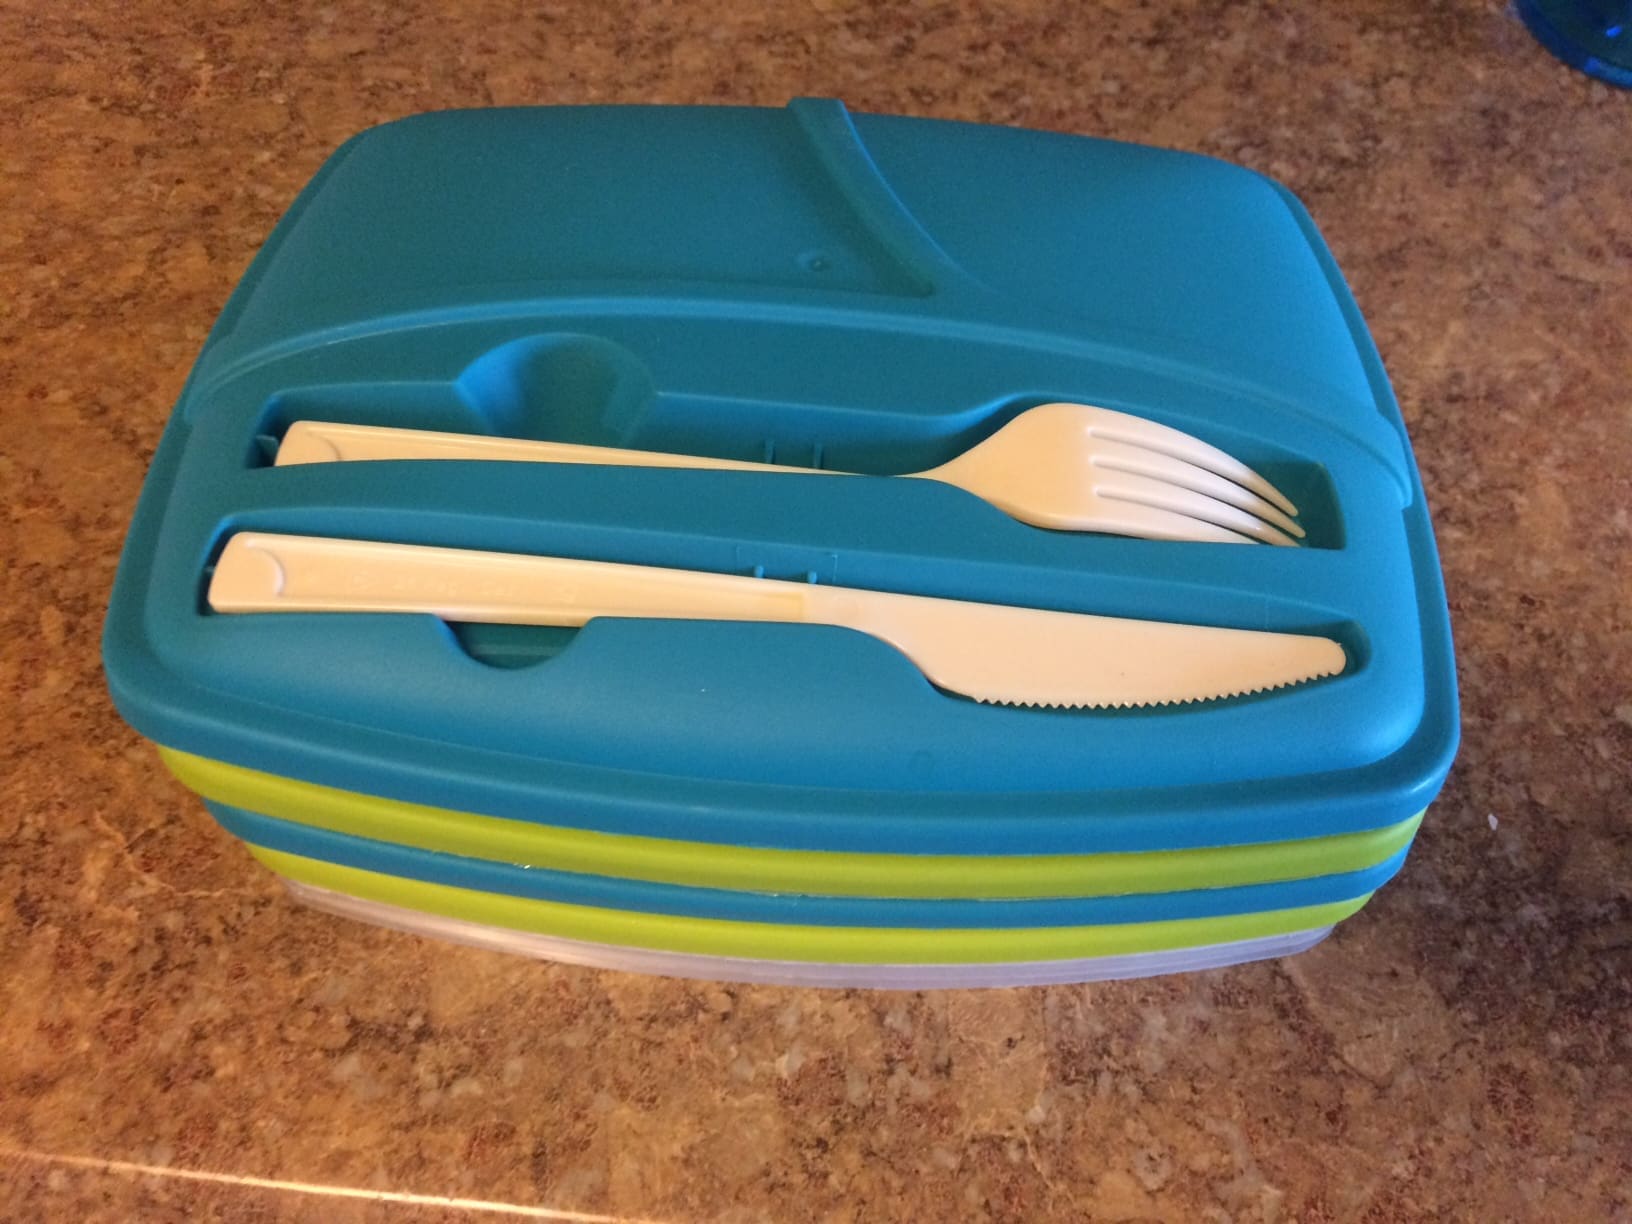 Reuseable lunch box